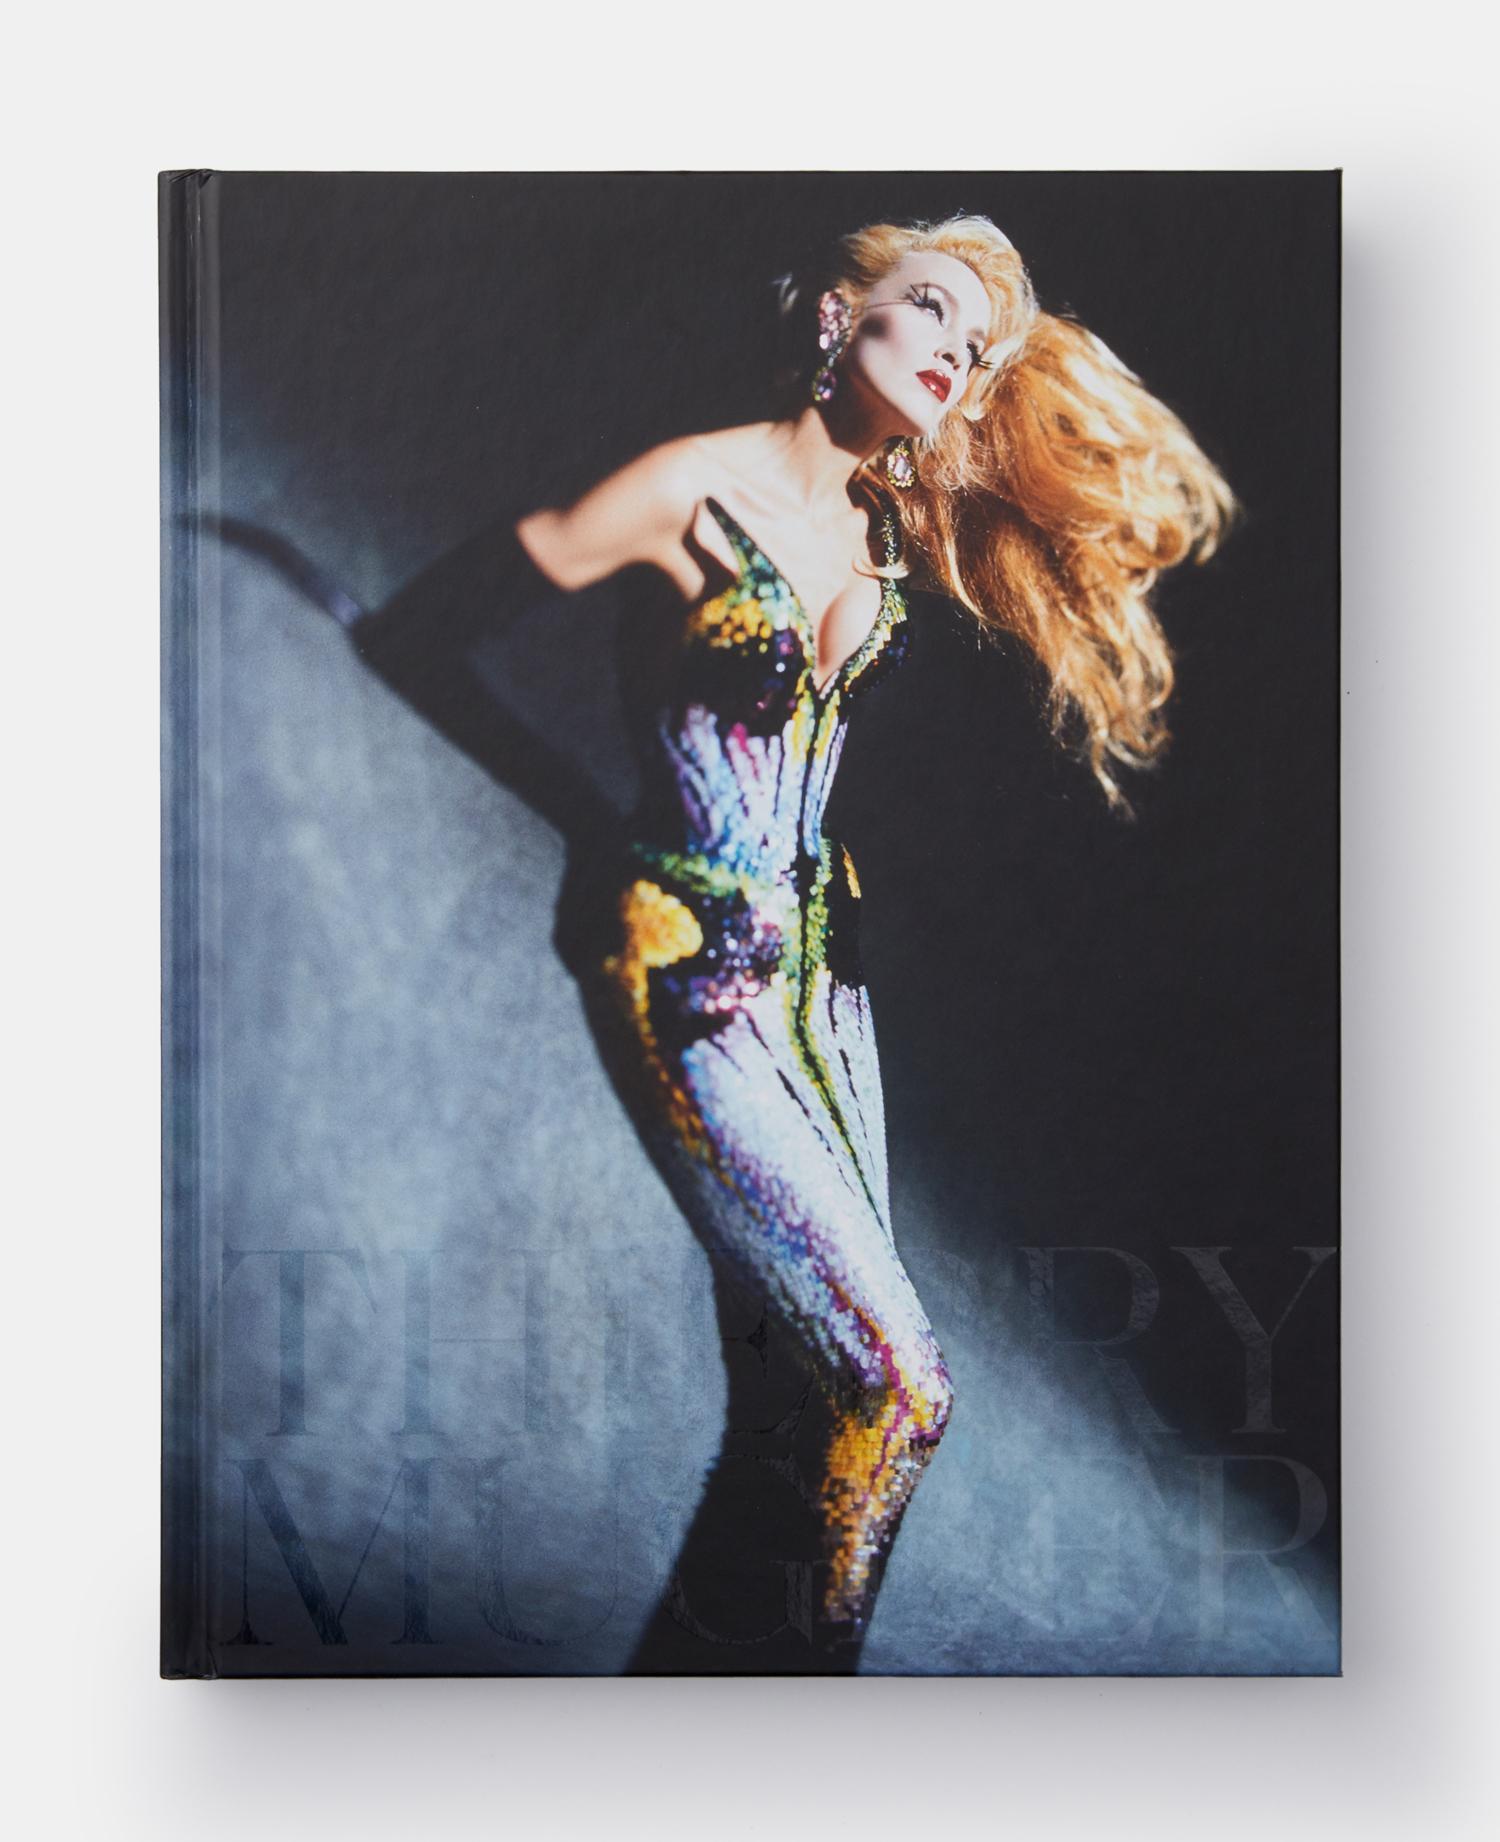 The definitive book on the iconic couturier and fashion revolutionary Thierry Mugler
Thierry Mugler has, since the creation of his label in 1974, continuously revolutionized contemporary fashion with his singular, imaginative vision. Beyond creating